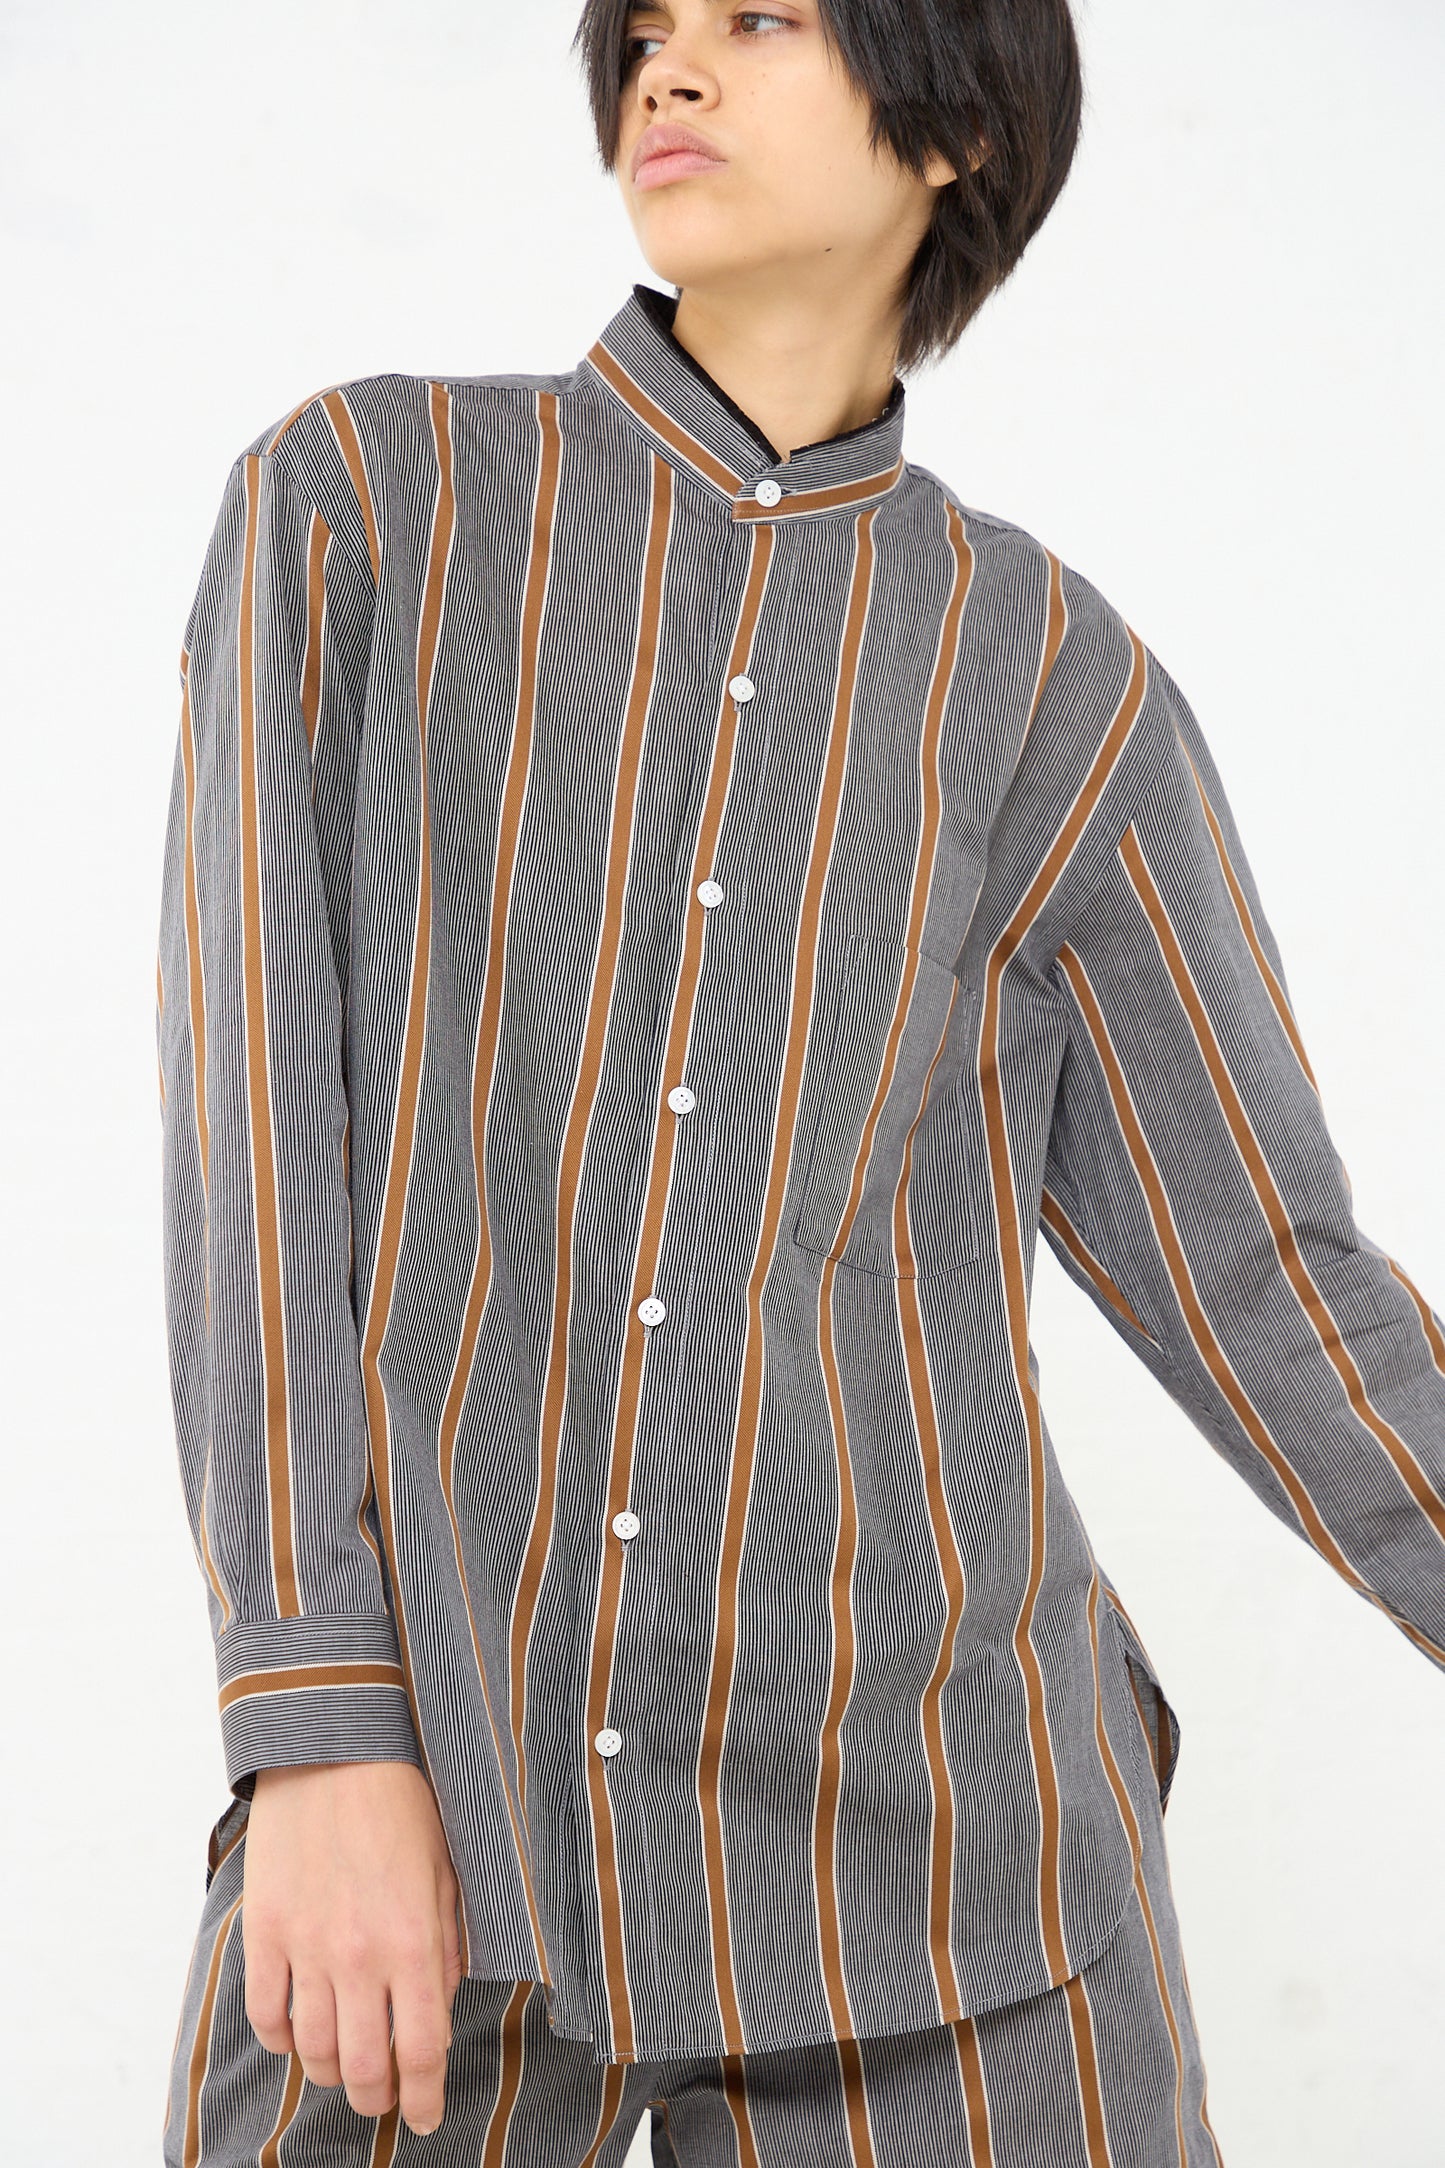 A woman wearing a lightweight, Cristaseya Mao Shirt with Fringed Collar in Striped Black and Noisette.